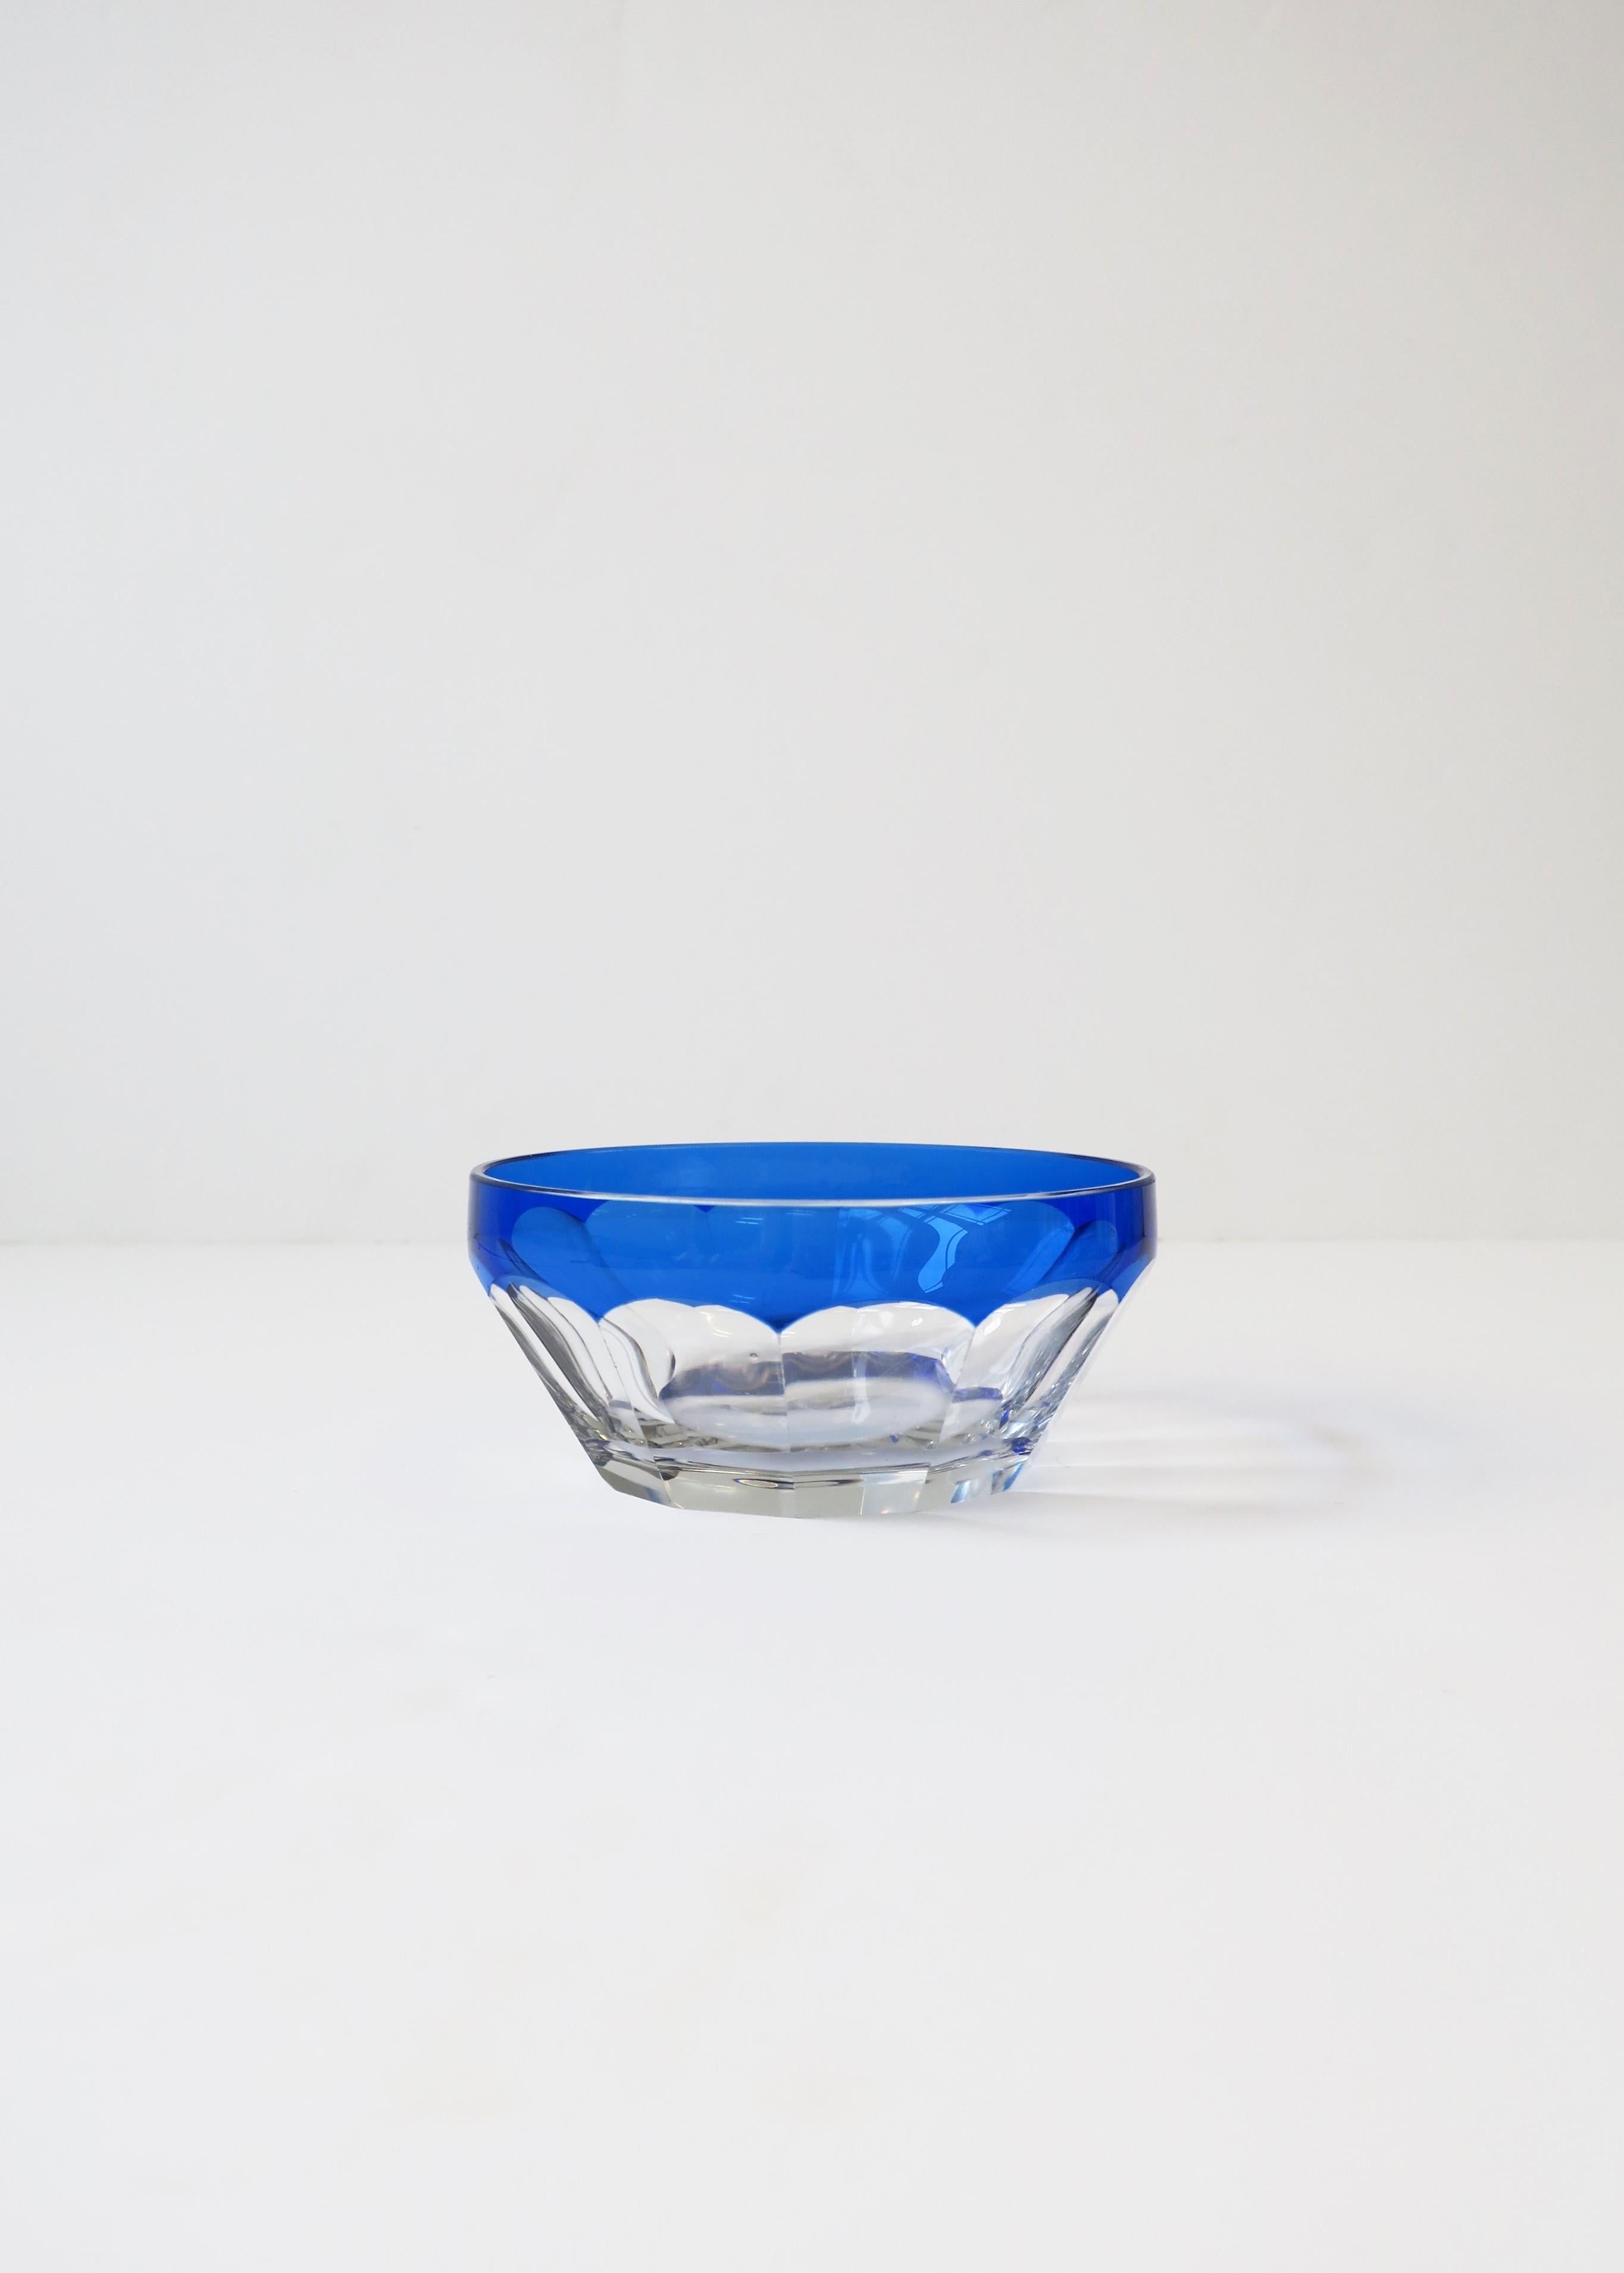 A very beautiful European cobalt blue and clear crystal bowl in the style of Bohemian crystal from luxury brand Moser. Bowl has beautiful details accentuating its cobalt blue hue as show in images. 

Bowl measures: 5